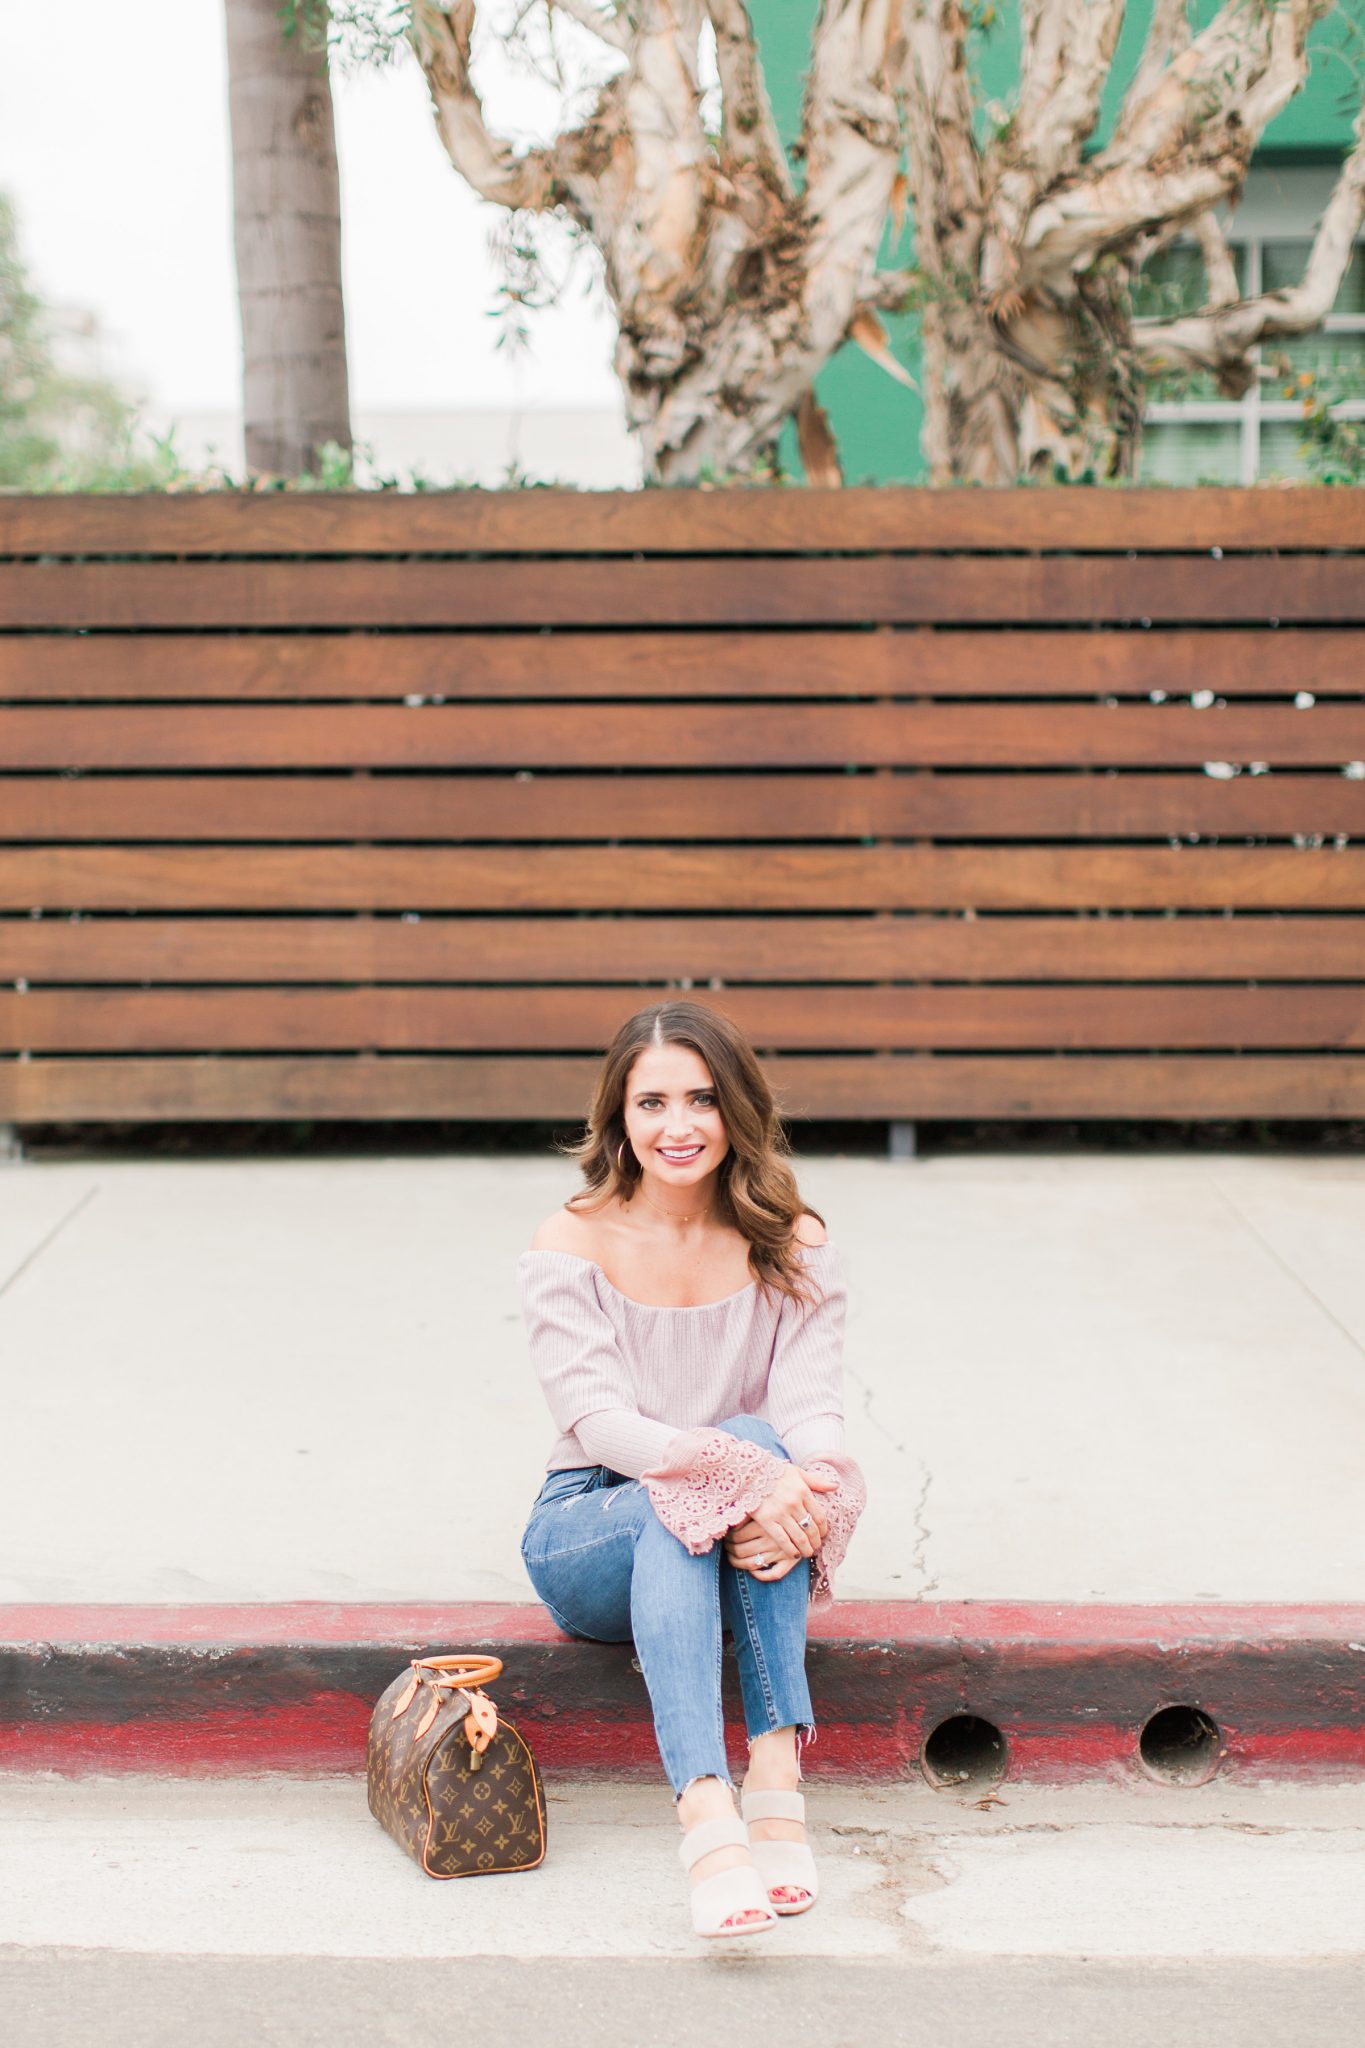 Pink Off The Shoulder Top by popular Orange County fashion blogger Maxie Elle